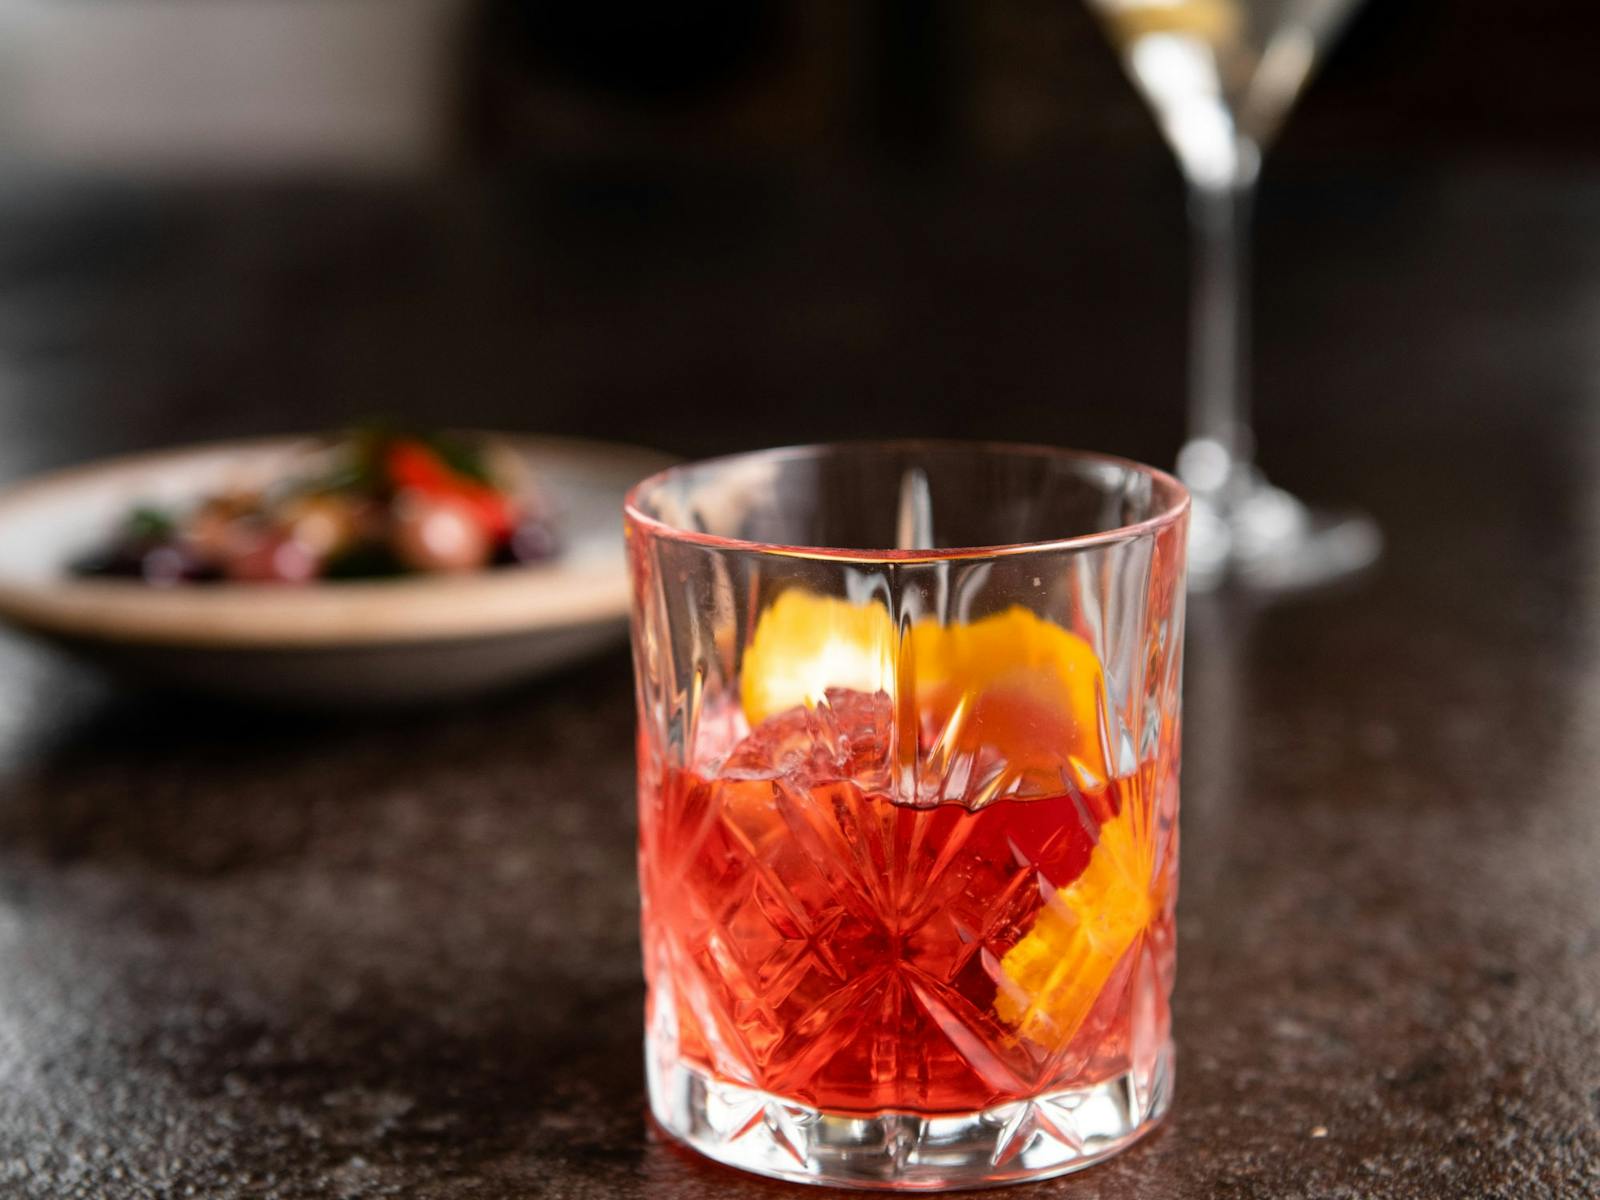 We have an expansive cocktail, spirit and wine list available. Featured here is the popular Negroni.